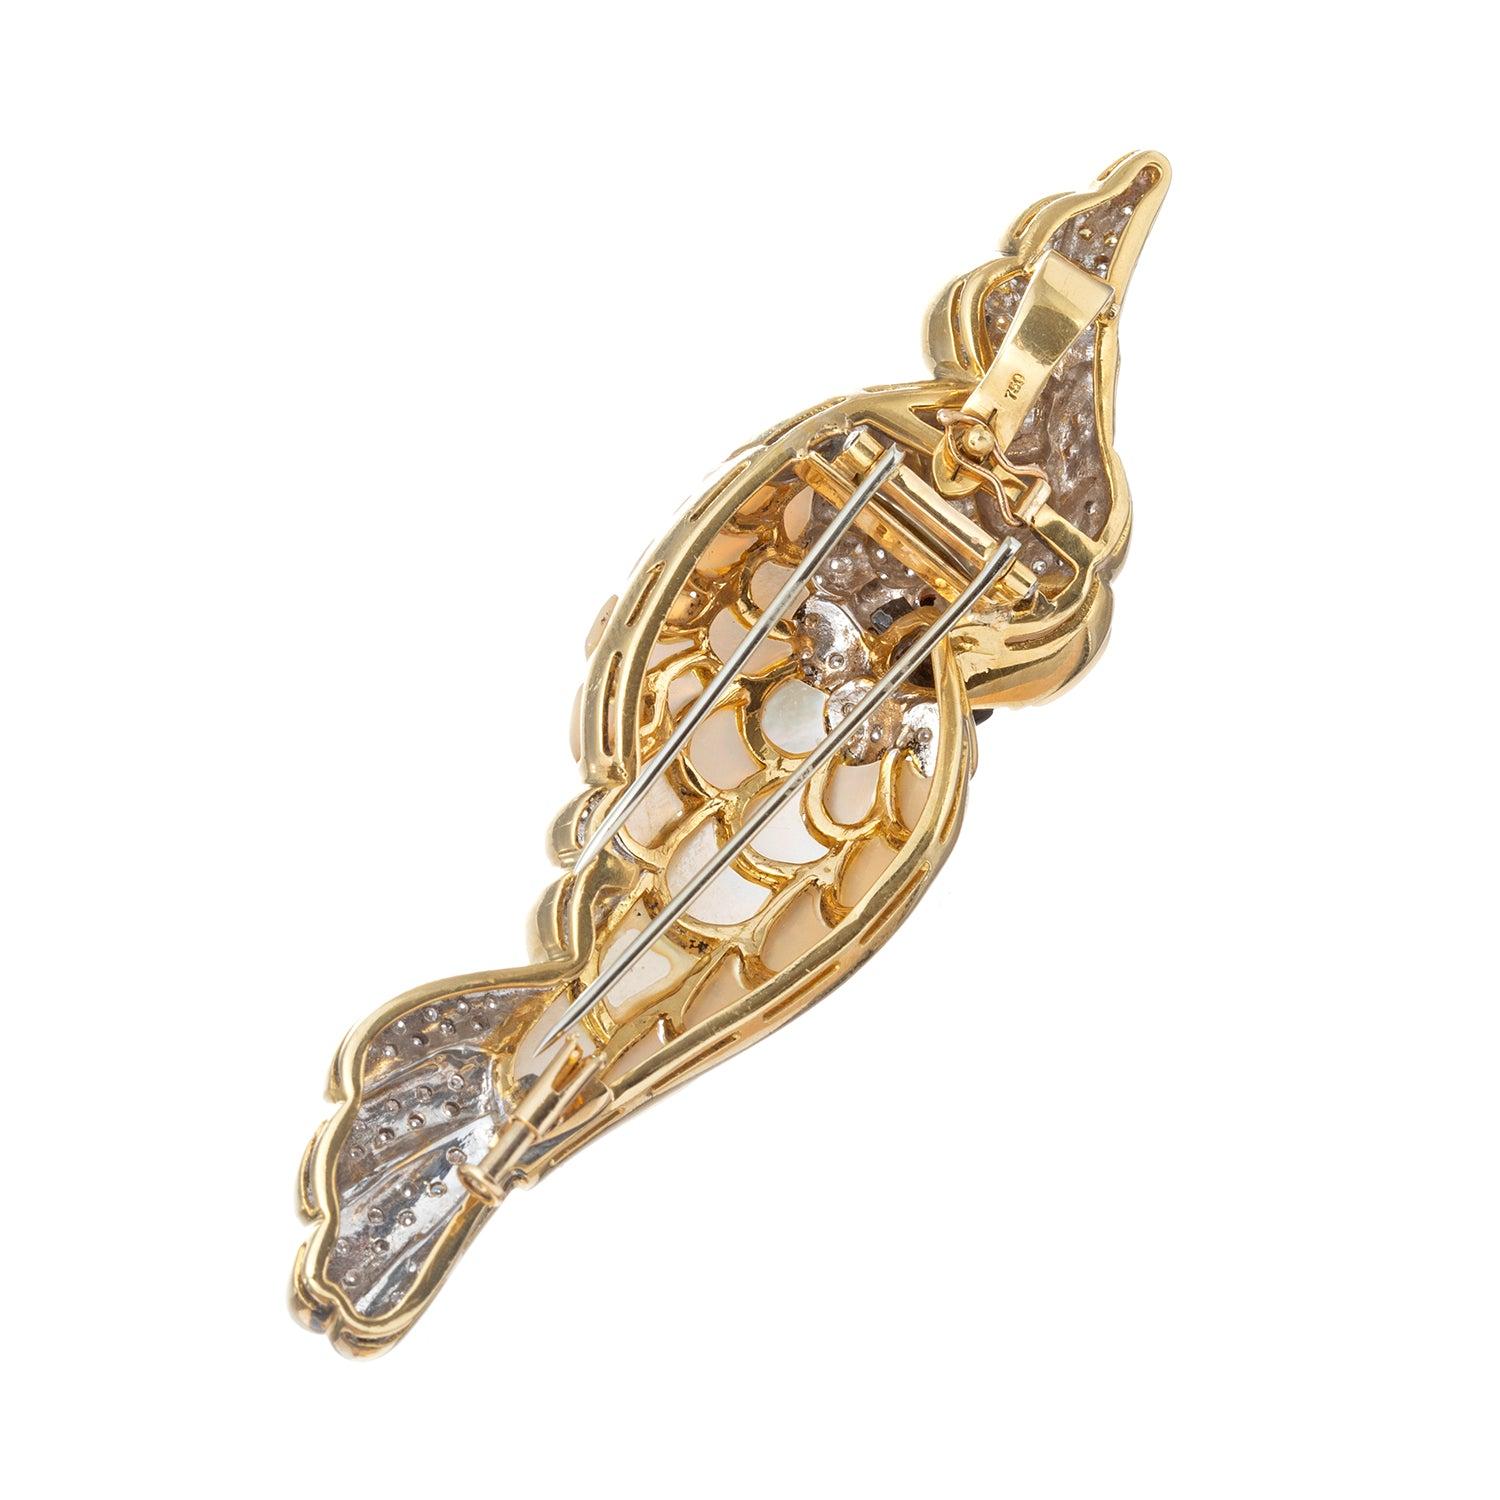 Round Cut 18k Gold Diamond Mother-of-Pearl Cockatoo Pendant Brooch